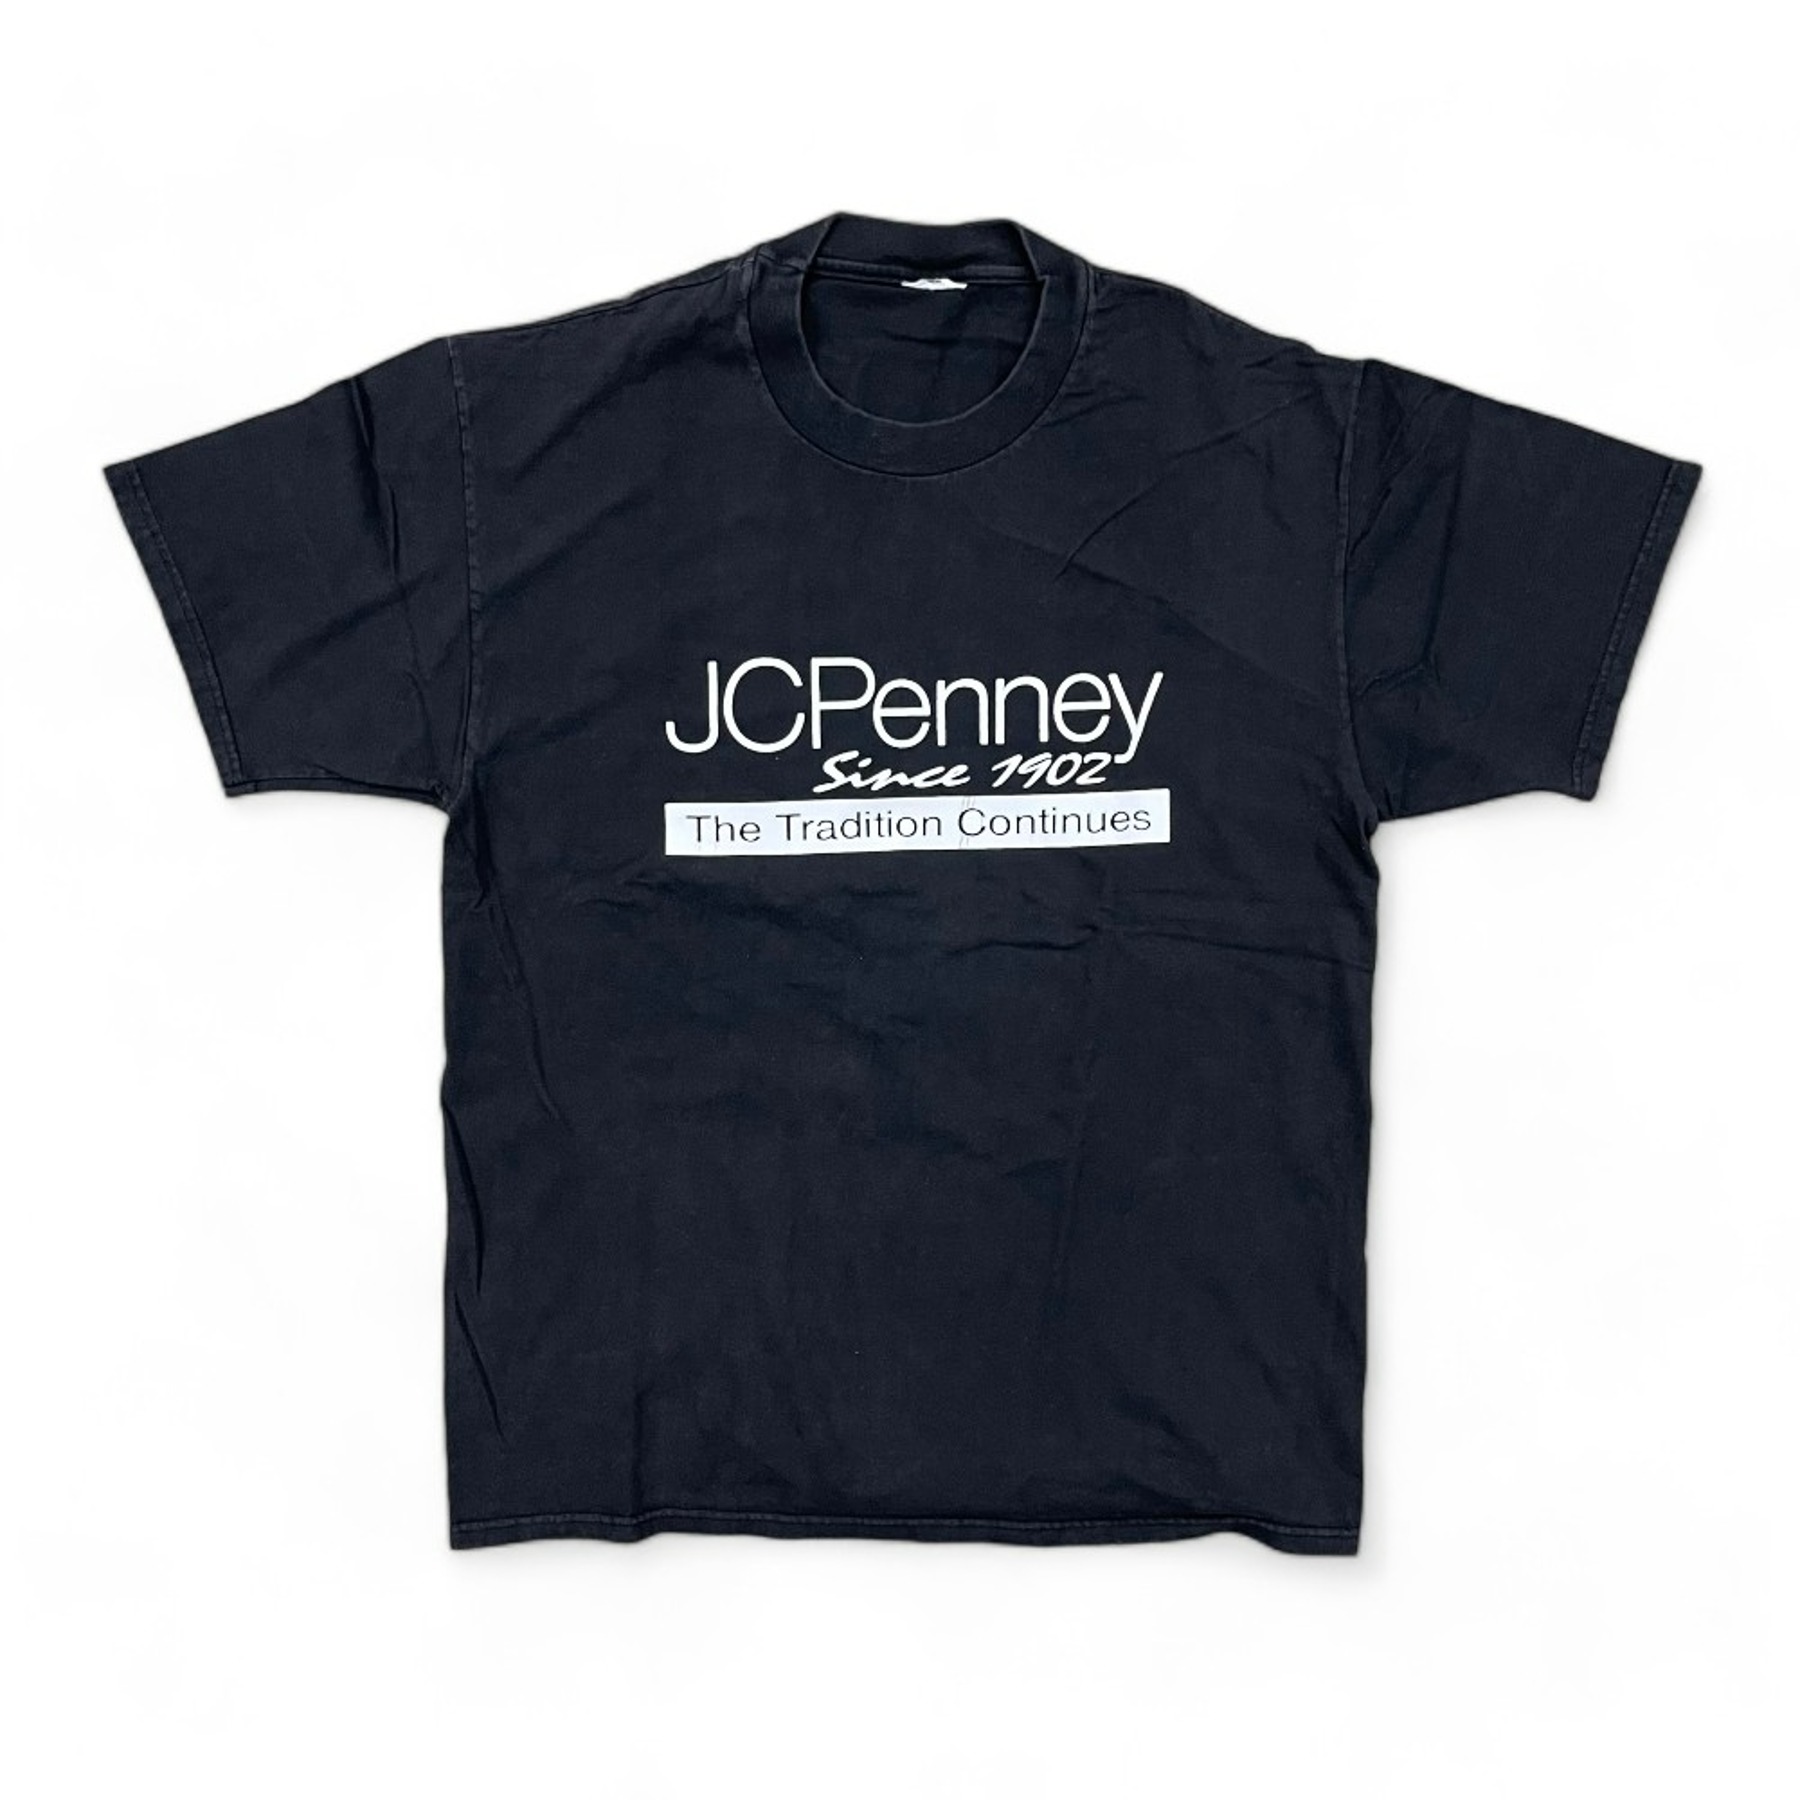 Vintage JCPenney Tee - 100